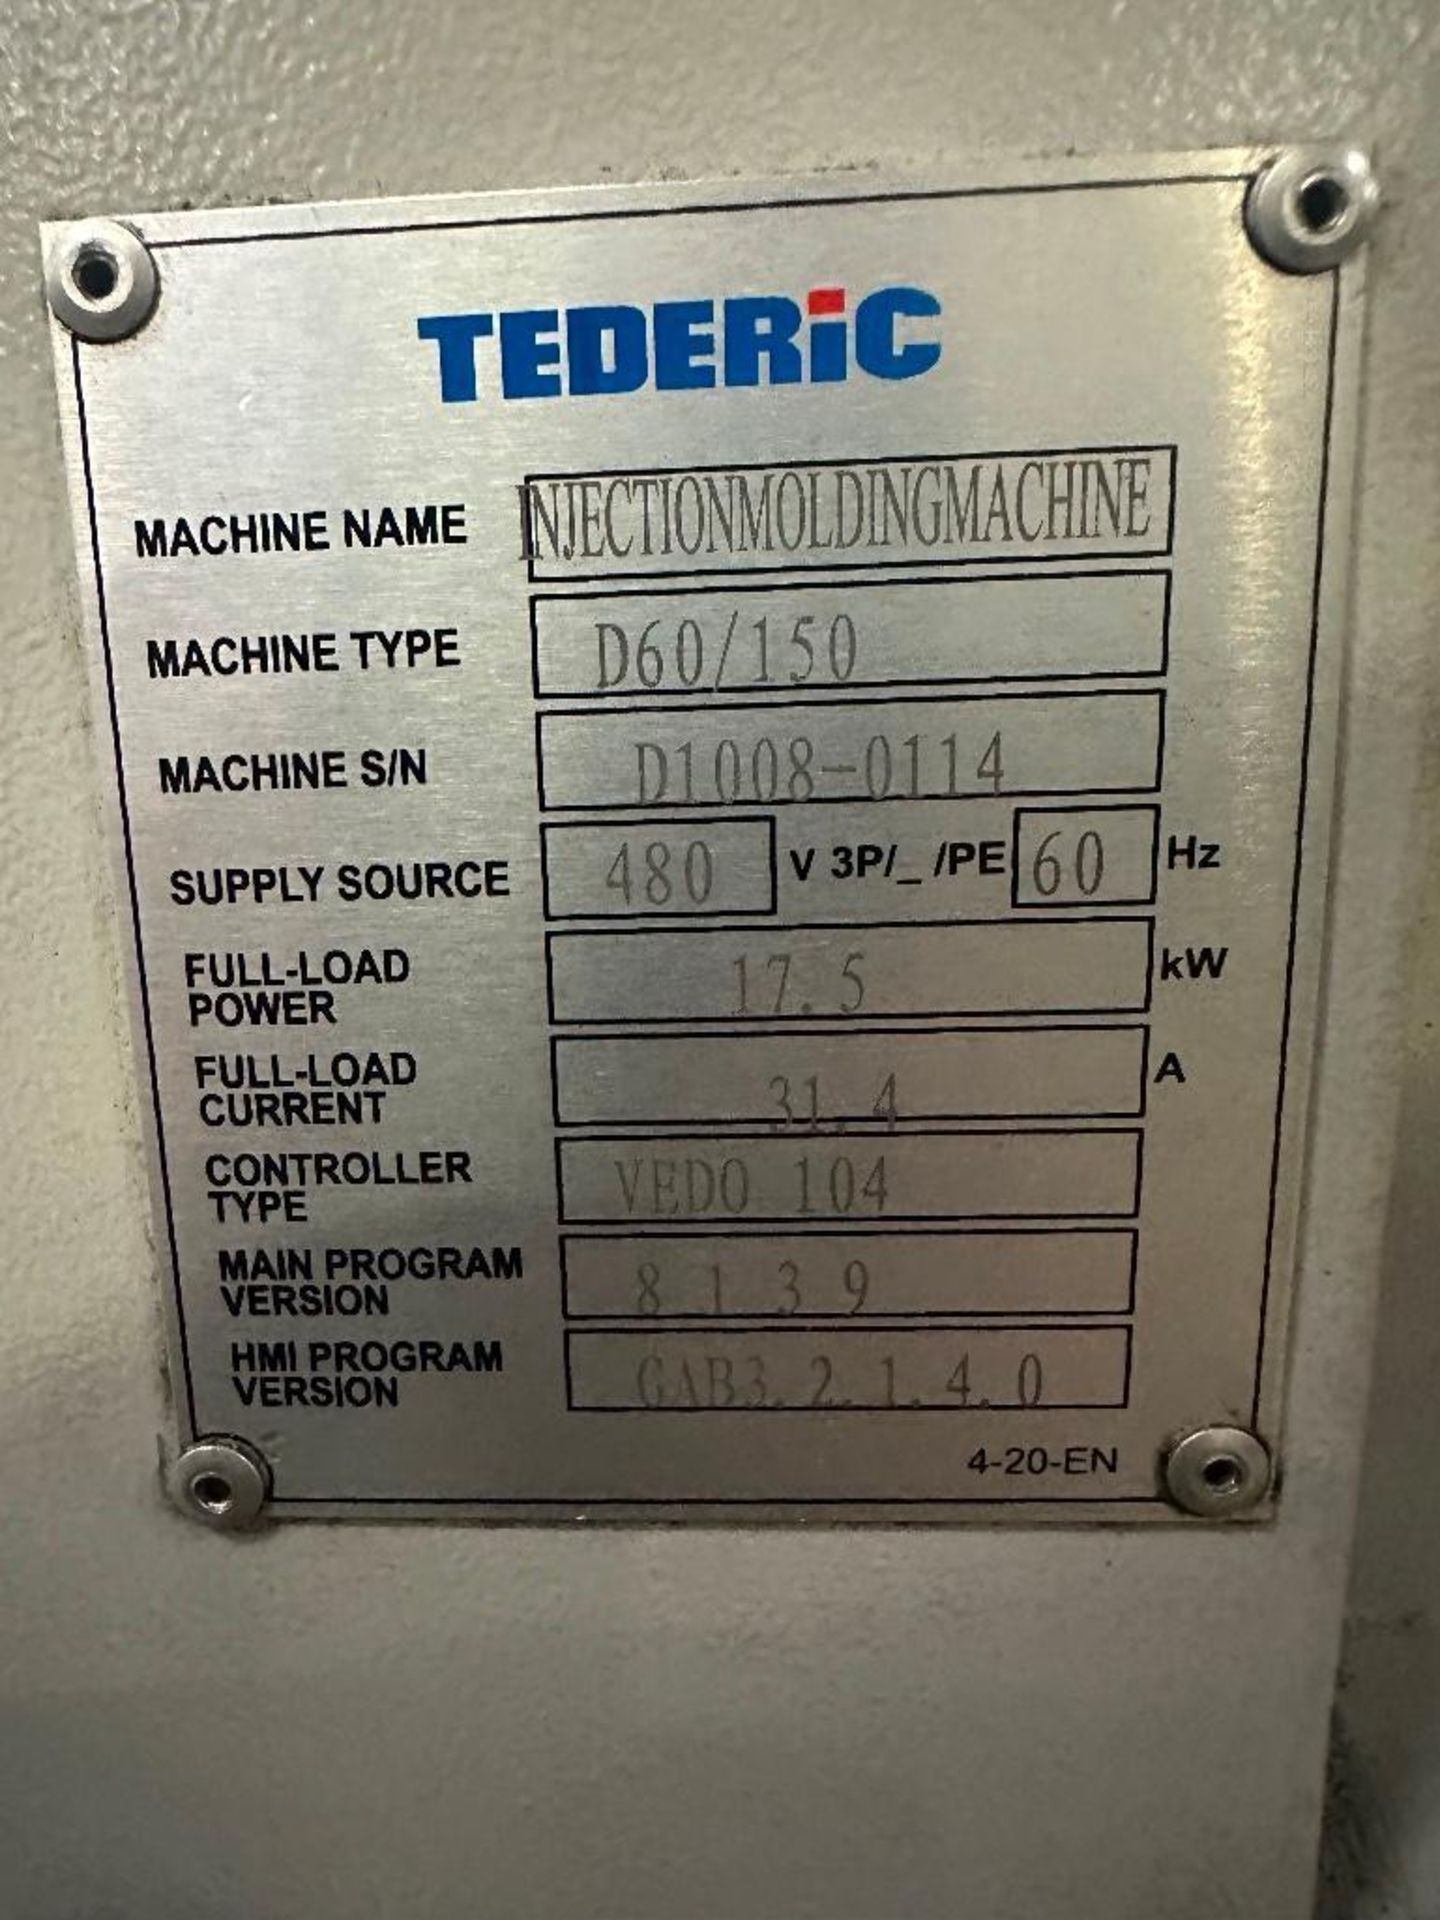 66 Ton Tederic D60/150 Plastic Injection Molder, Gefran GF Vedo 104 Control, s/n D1008-0114, New - Image 21 of 23